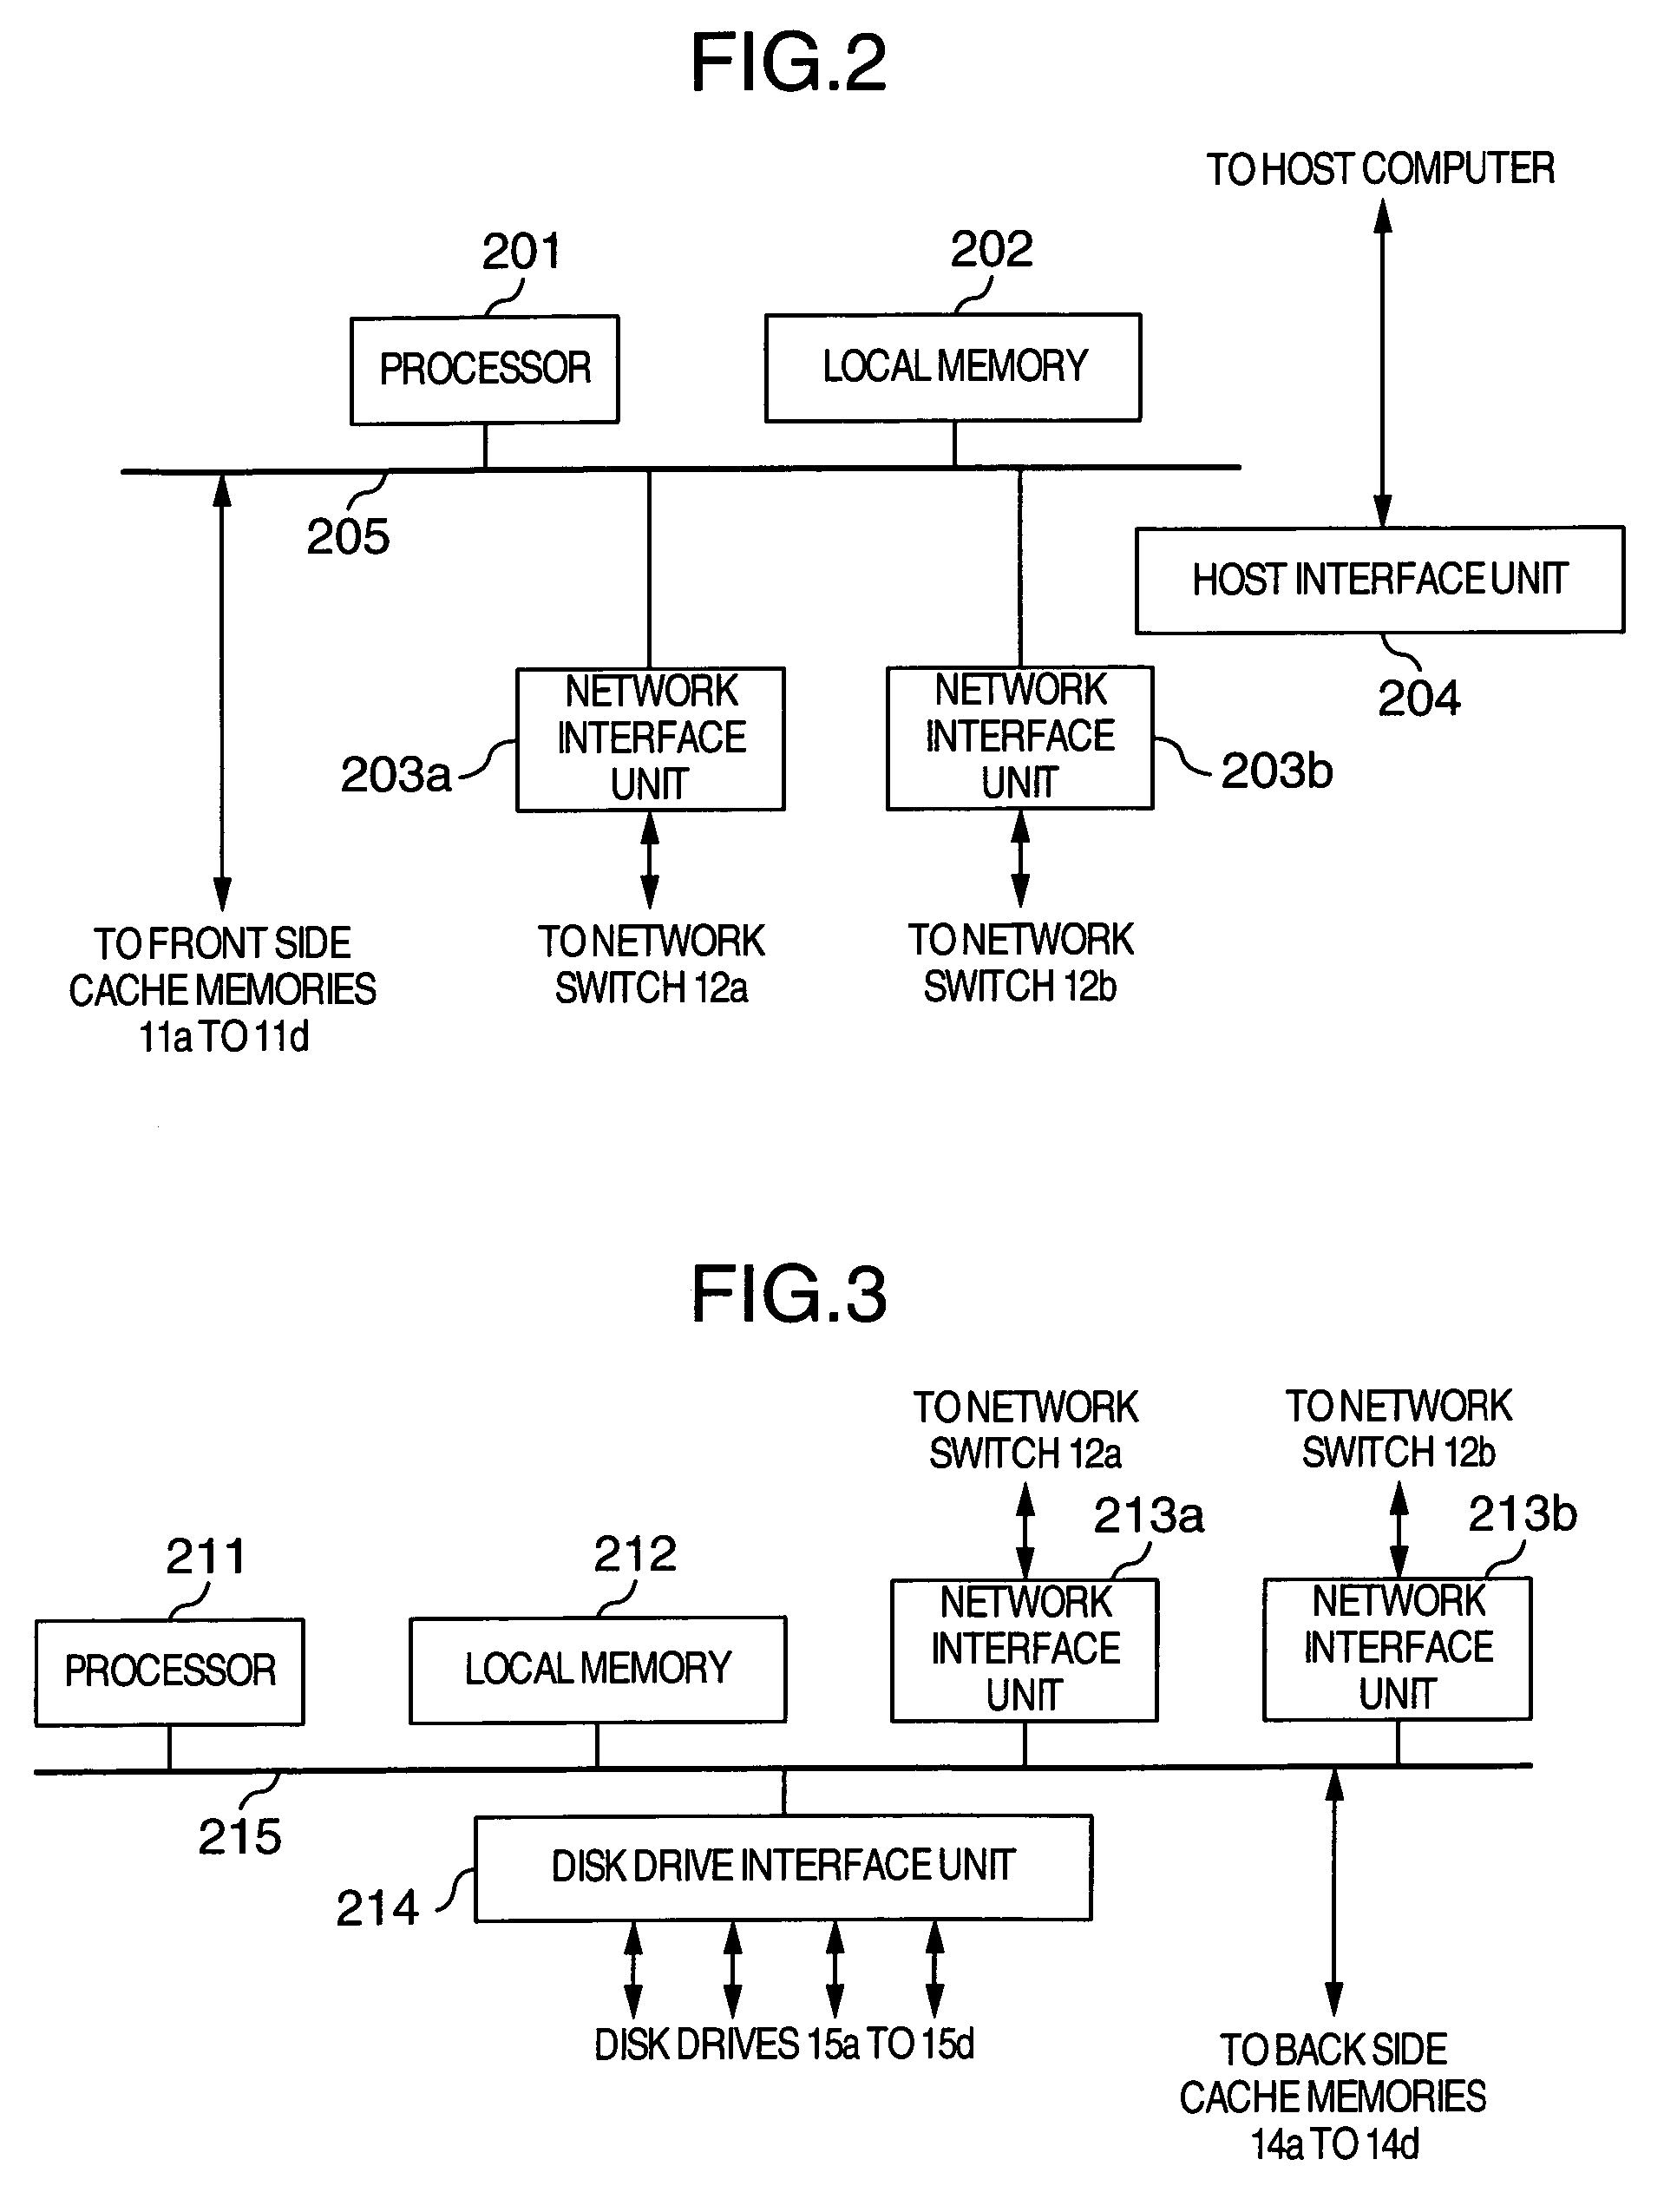 Storage system having network channels connecting shared cache memories to disk drives